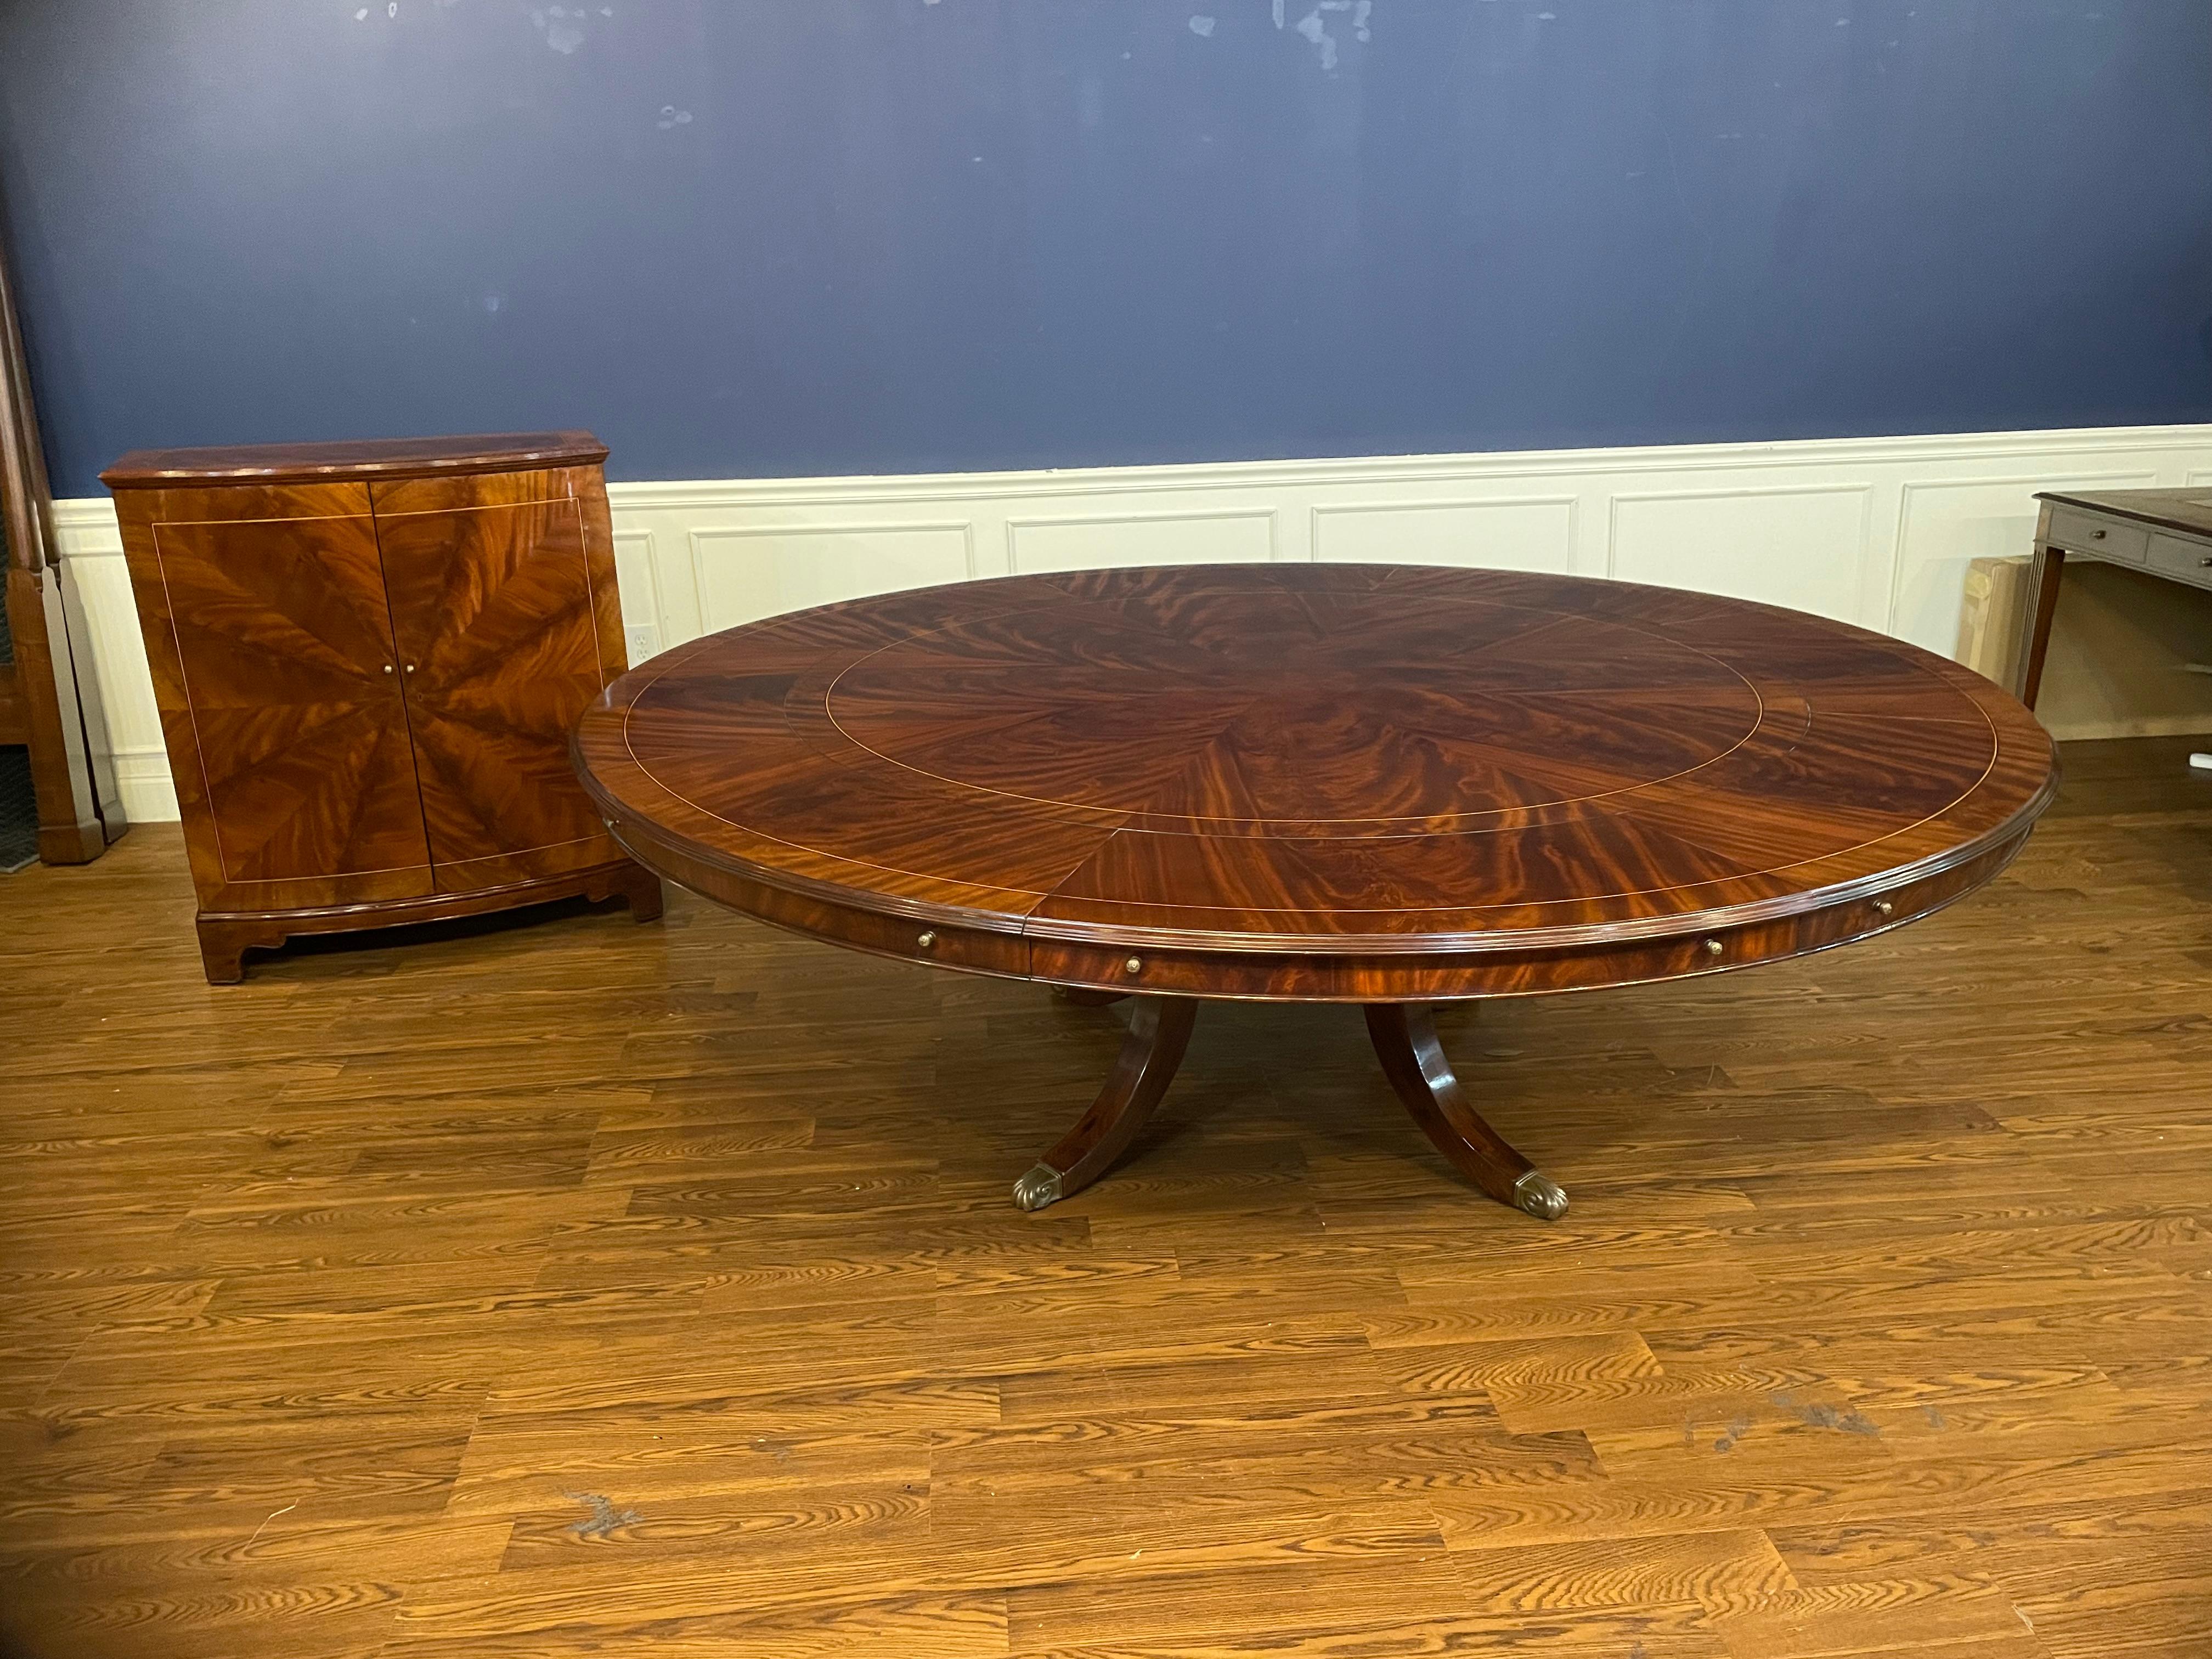 Regency 90” Round Mahogany Dining Table w/Leaf Storage Cabinet by Leighton Hall For Sale